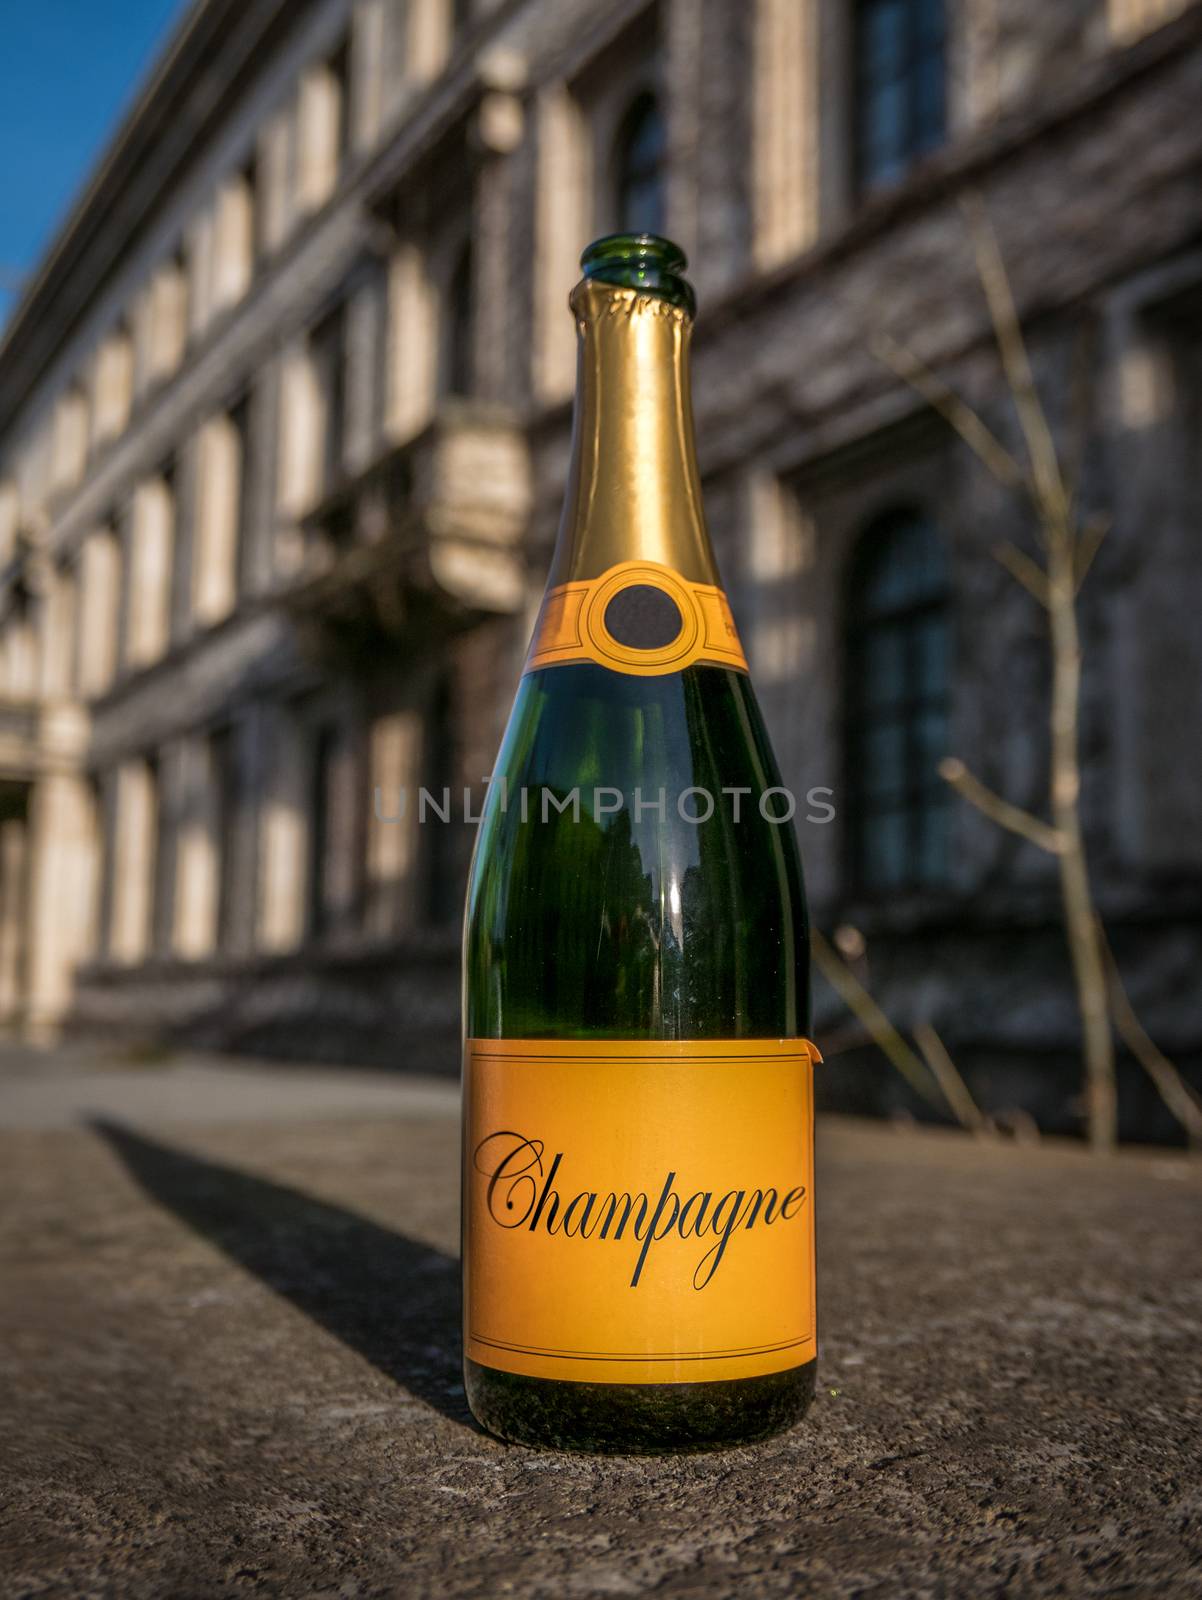 An Empty Bottle Of Champayne In The Street The Morning After A New Year's Party